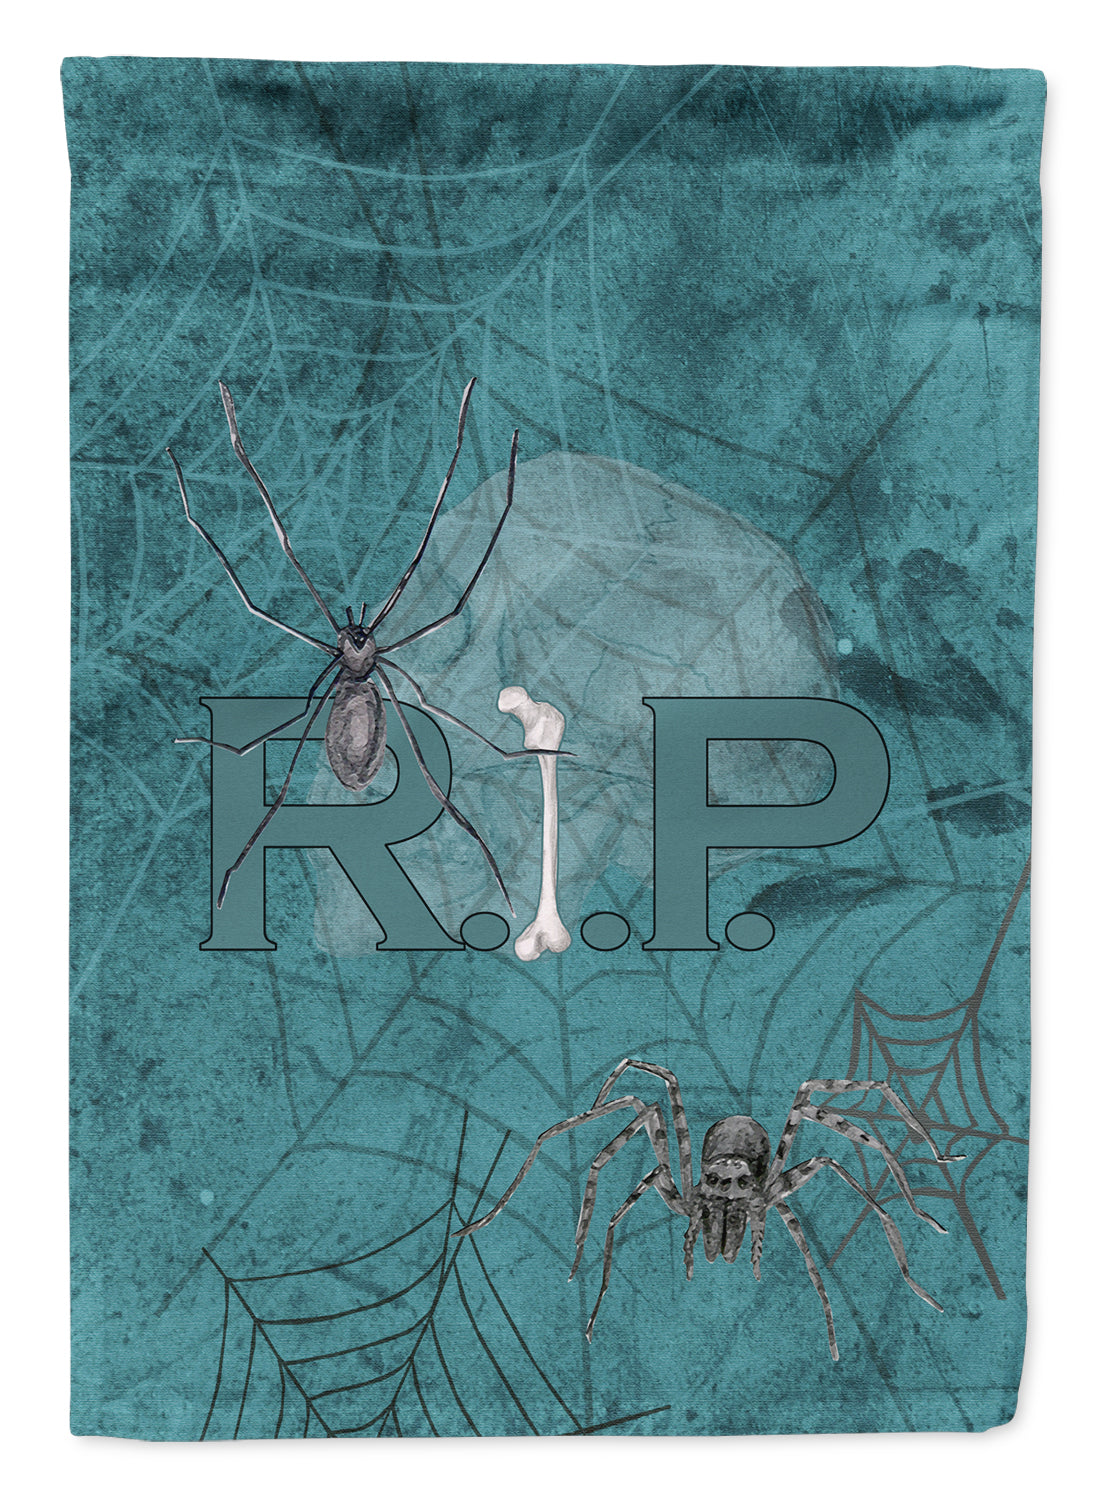 RIP Rest in Peace with spider web Halloween Flag Canvas House Size